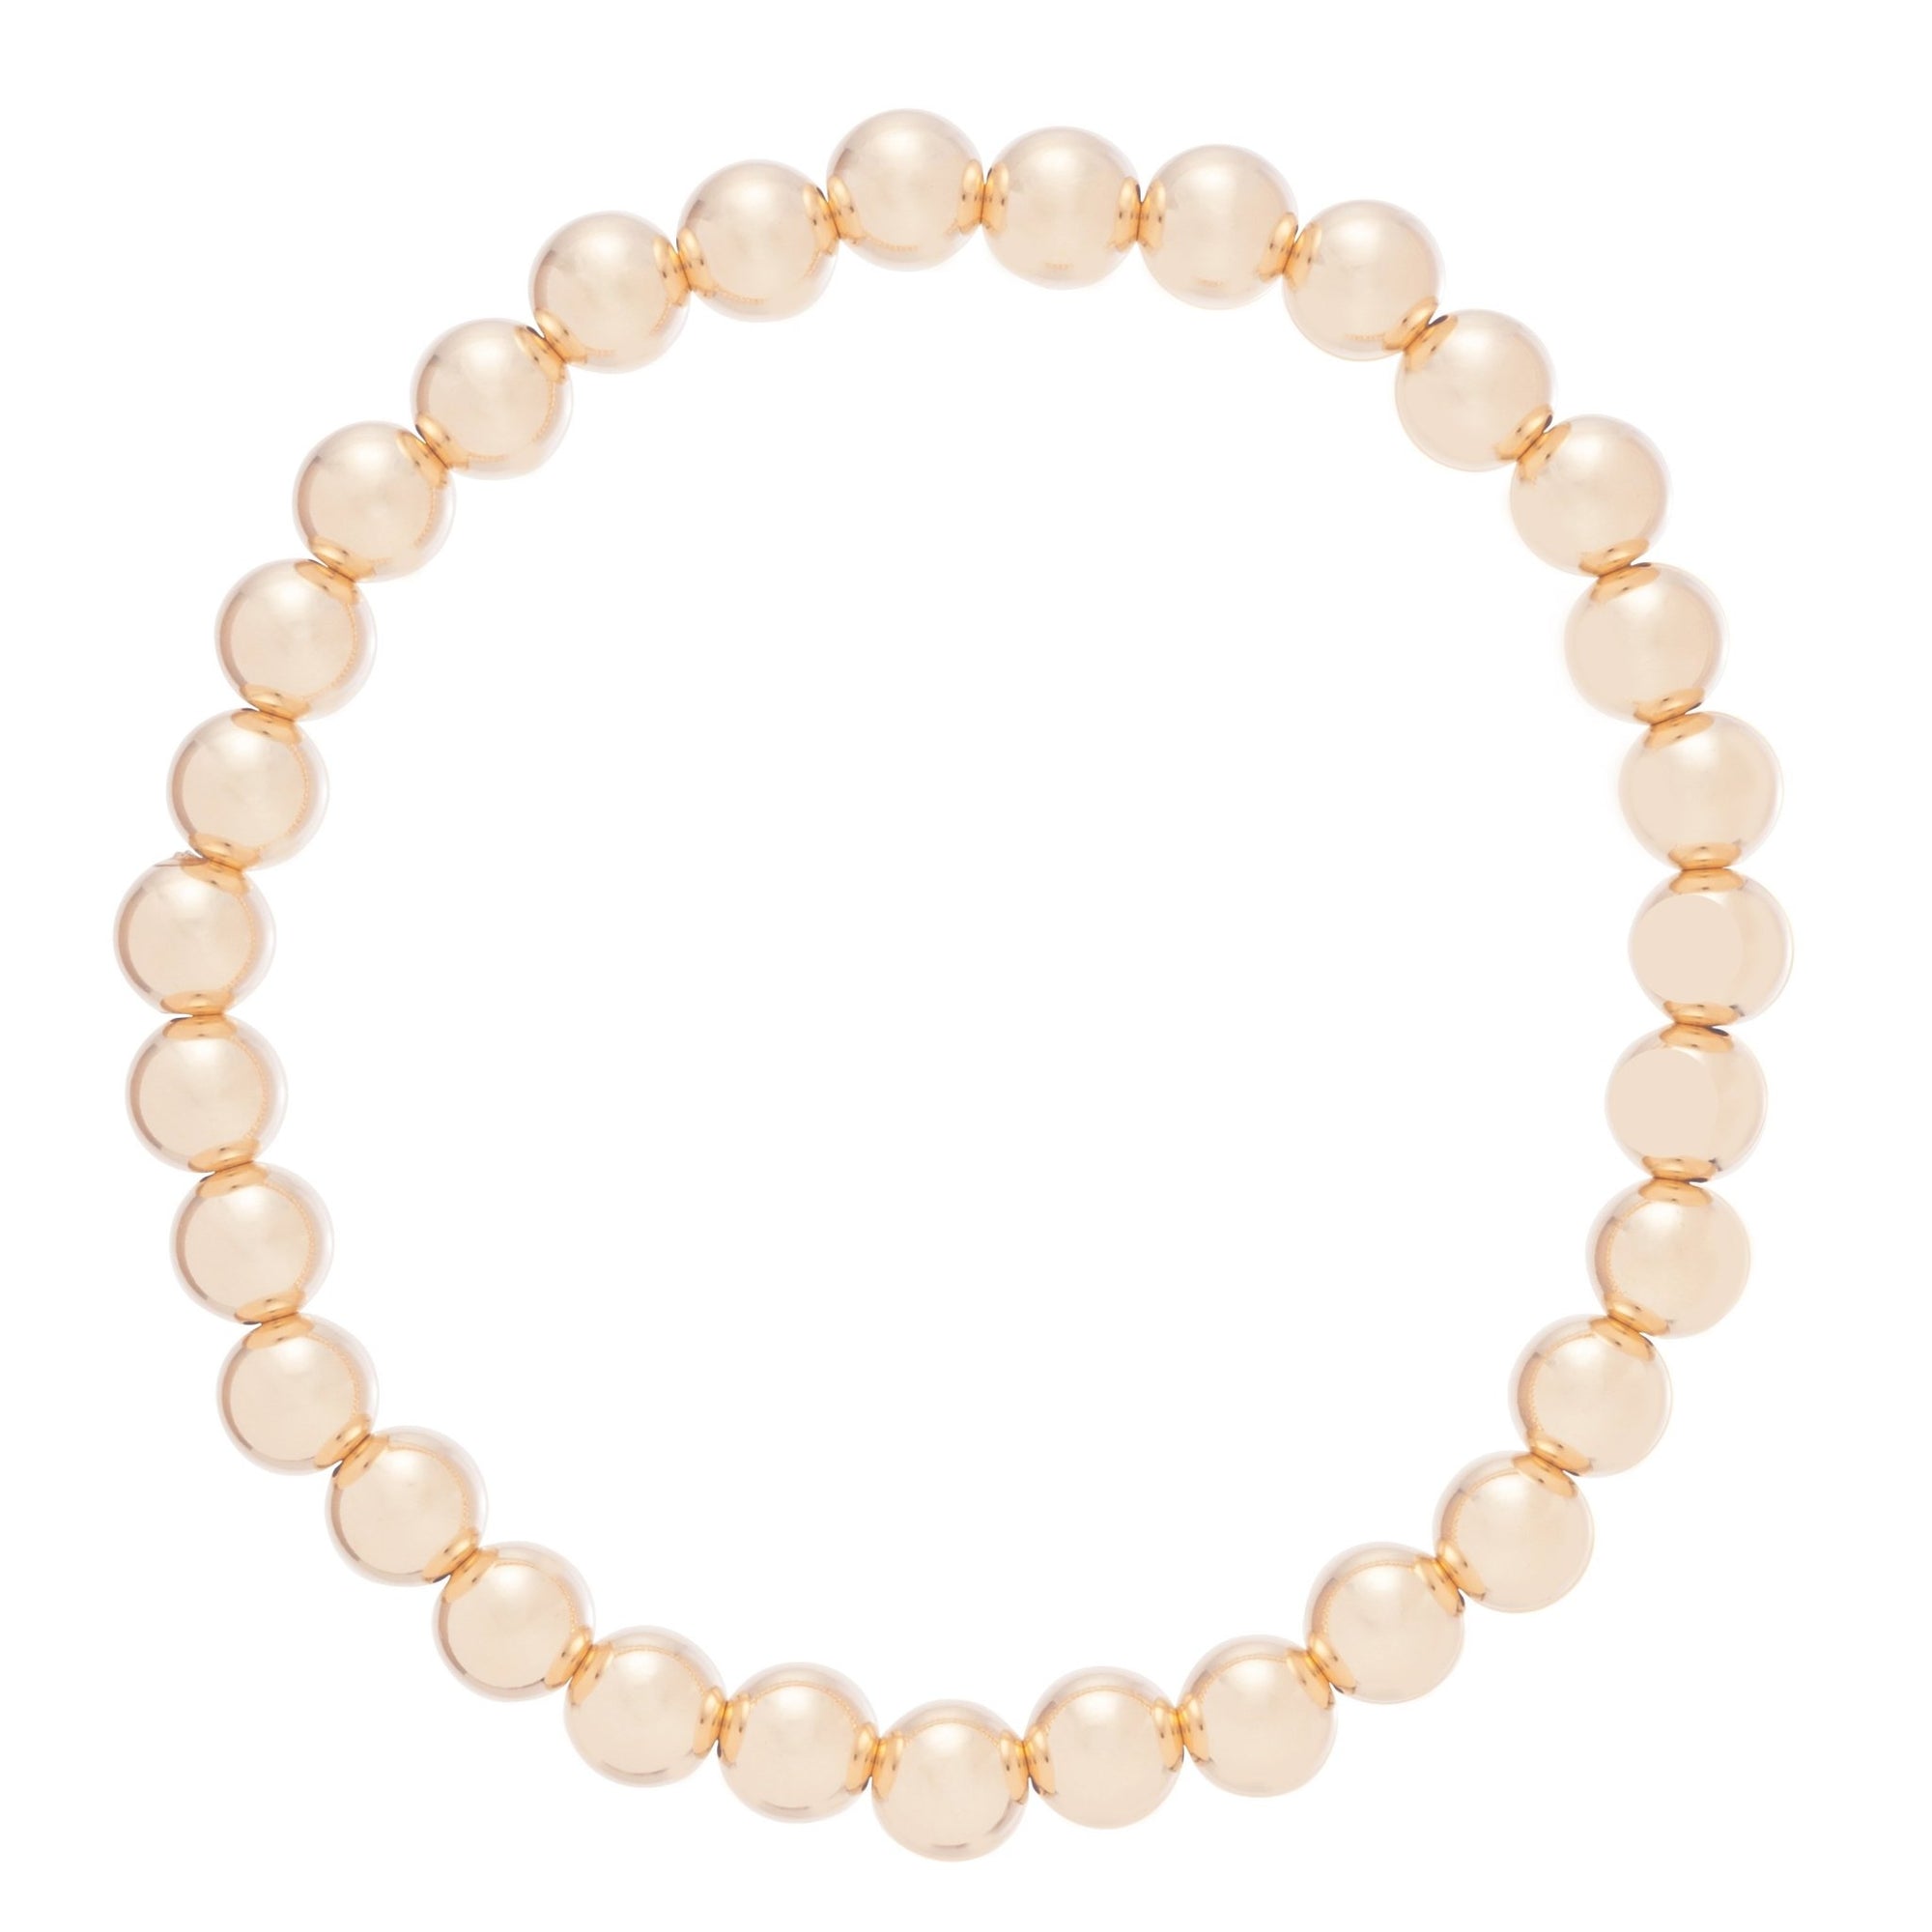 CLASSIC GOLD 6MM BEAD BRACELET - Molly's! A Chic and Unique Boutique 